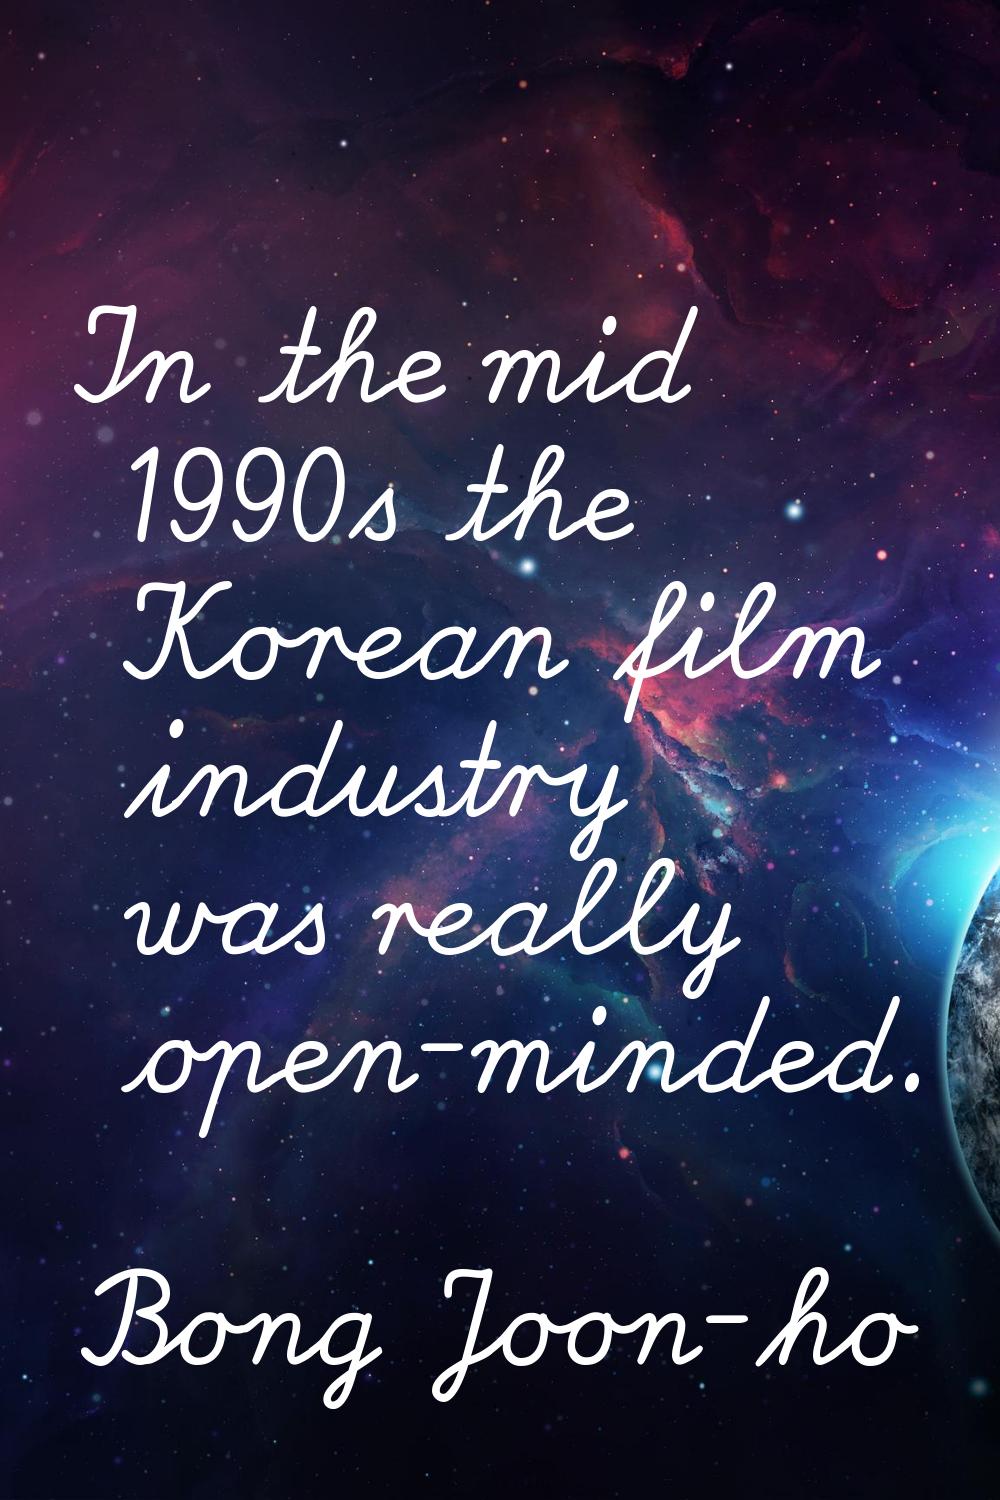 In the mid 1990s the Korean film industry was really open-minded.